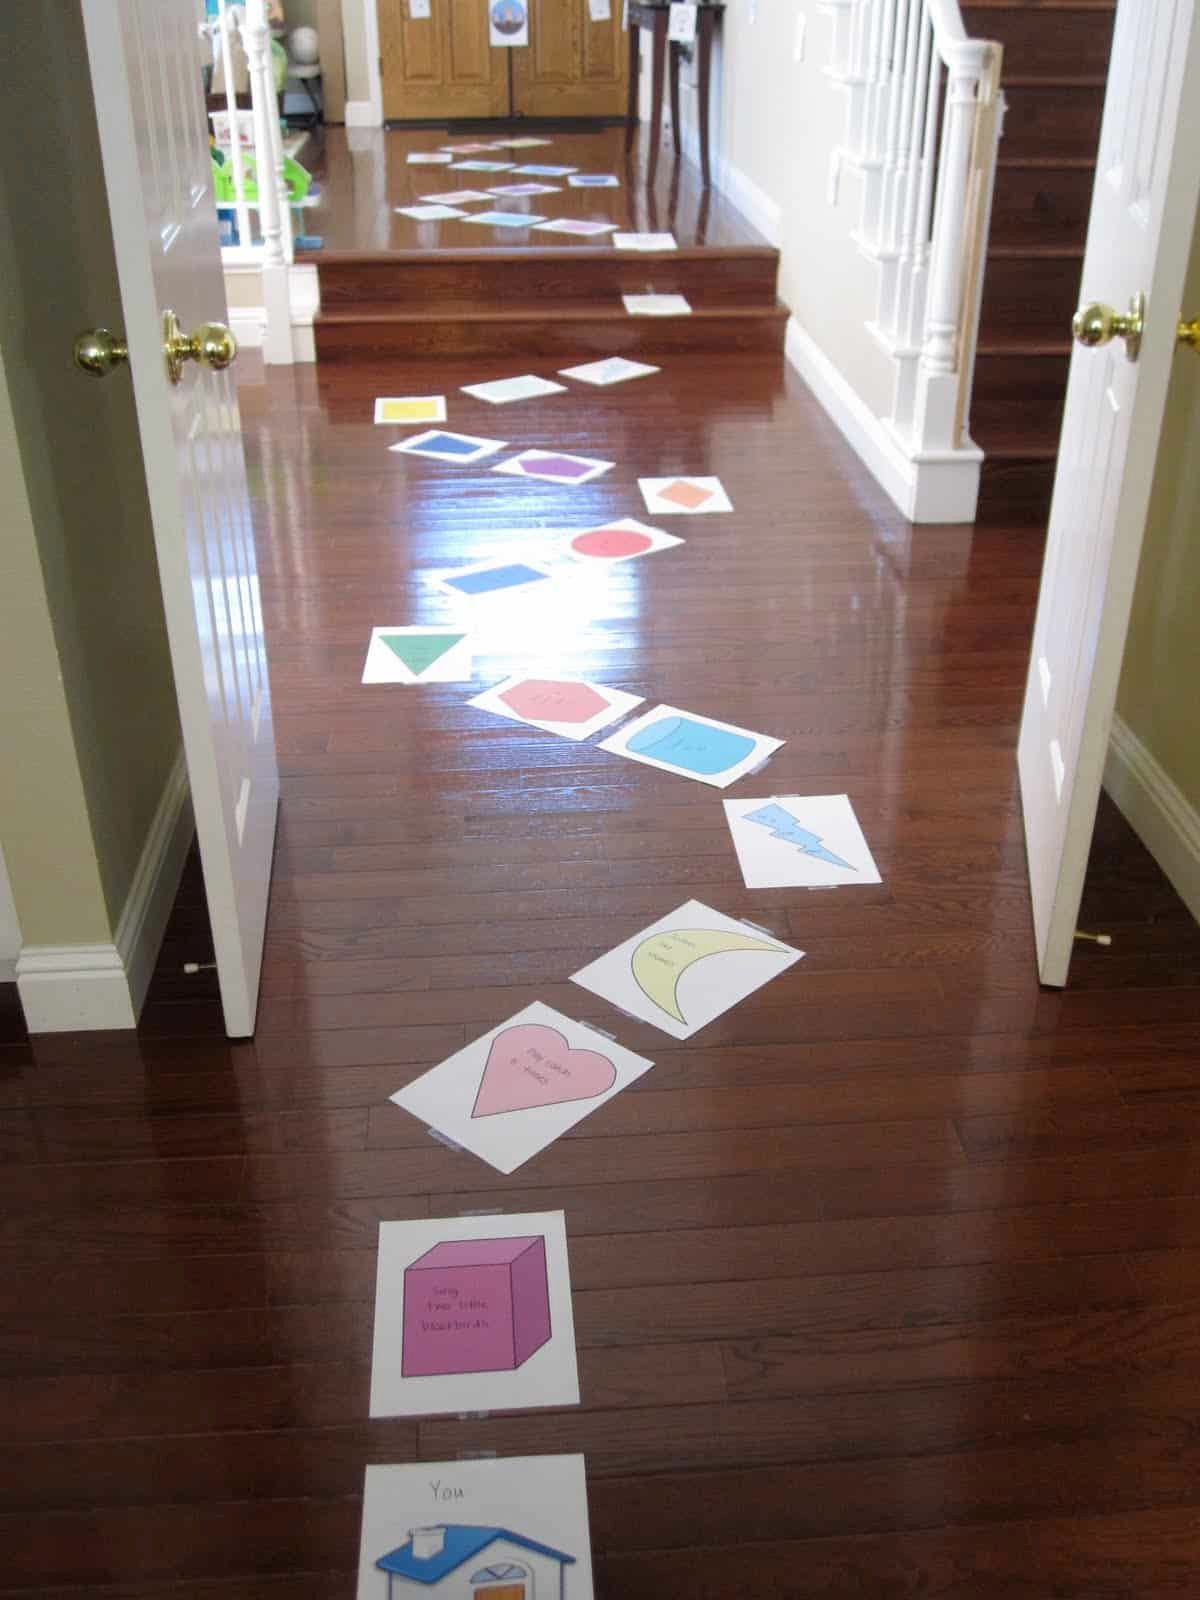 Bunch of obstacle course sheets spreaded on the floor in a house